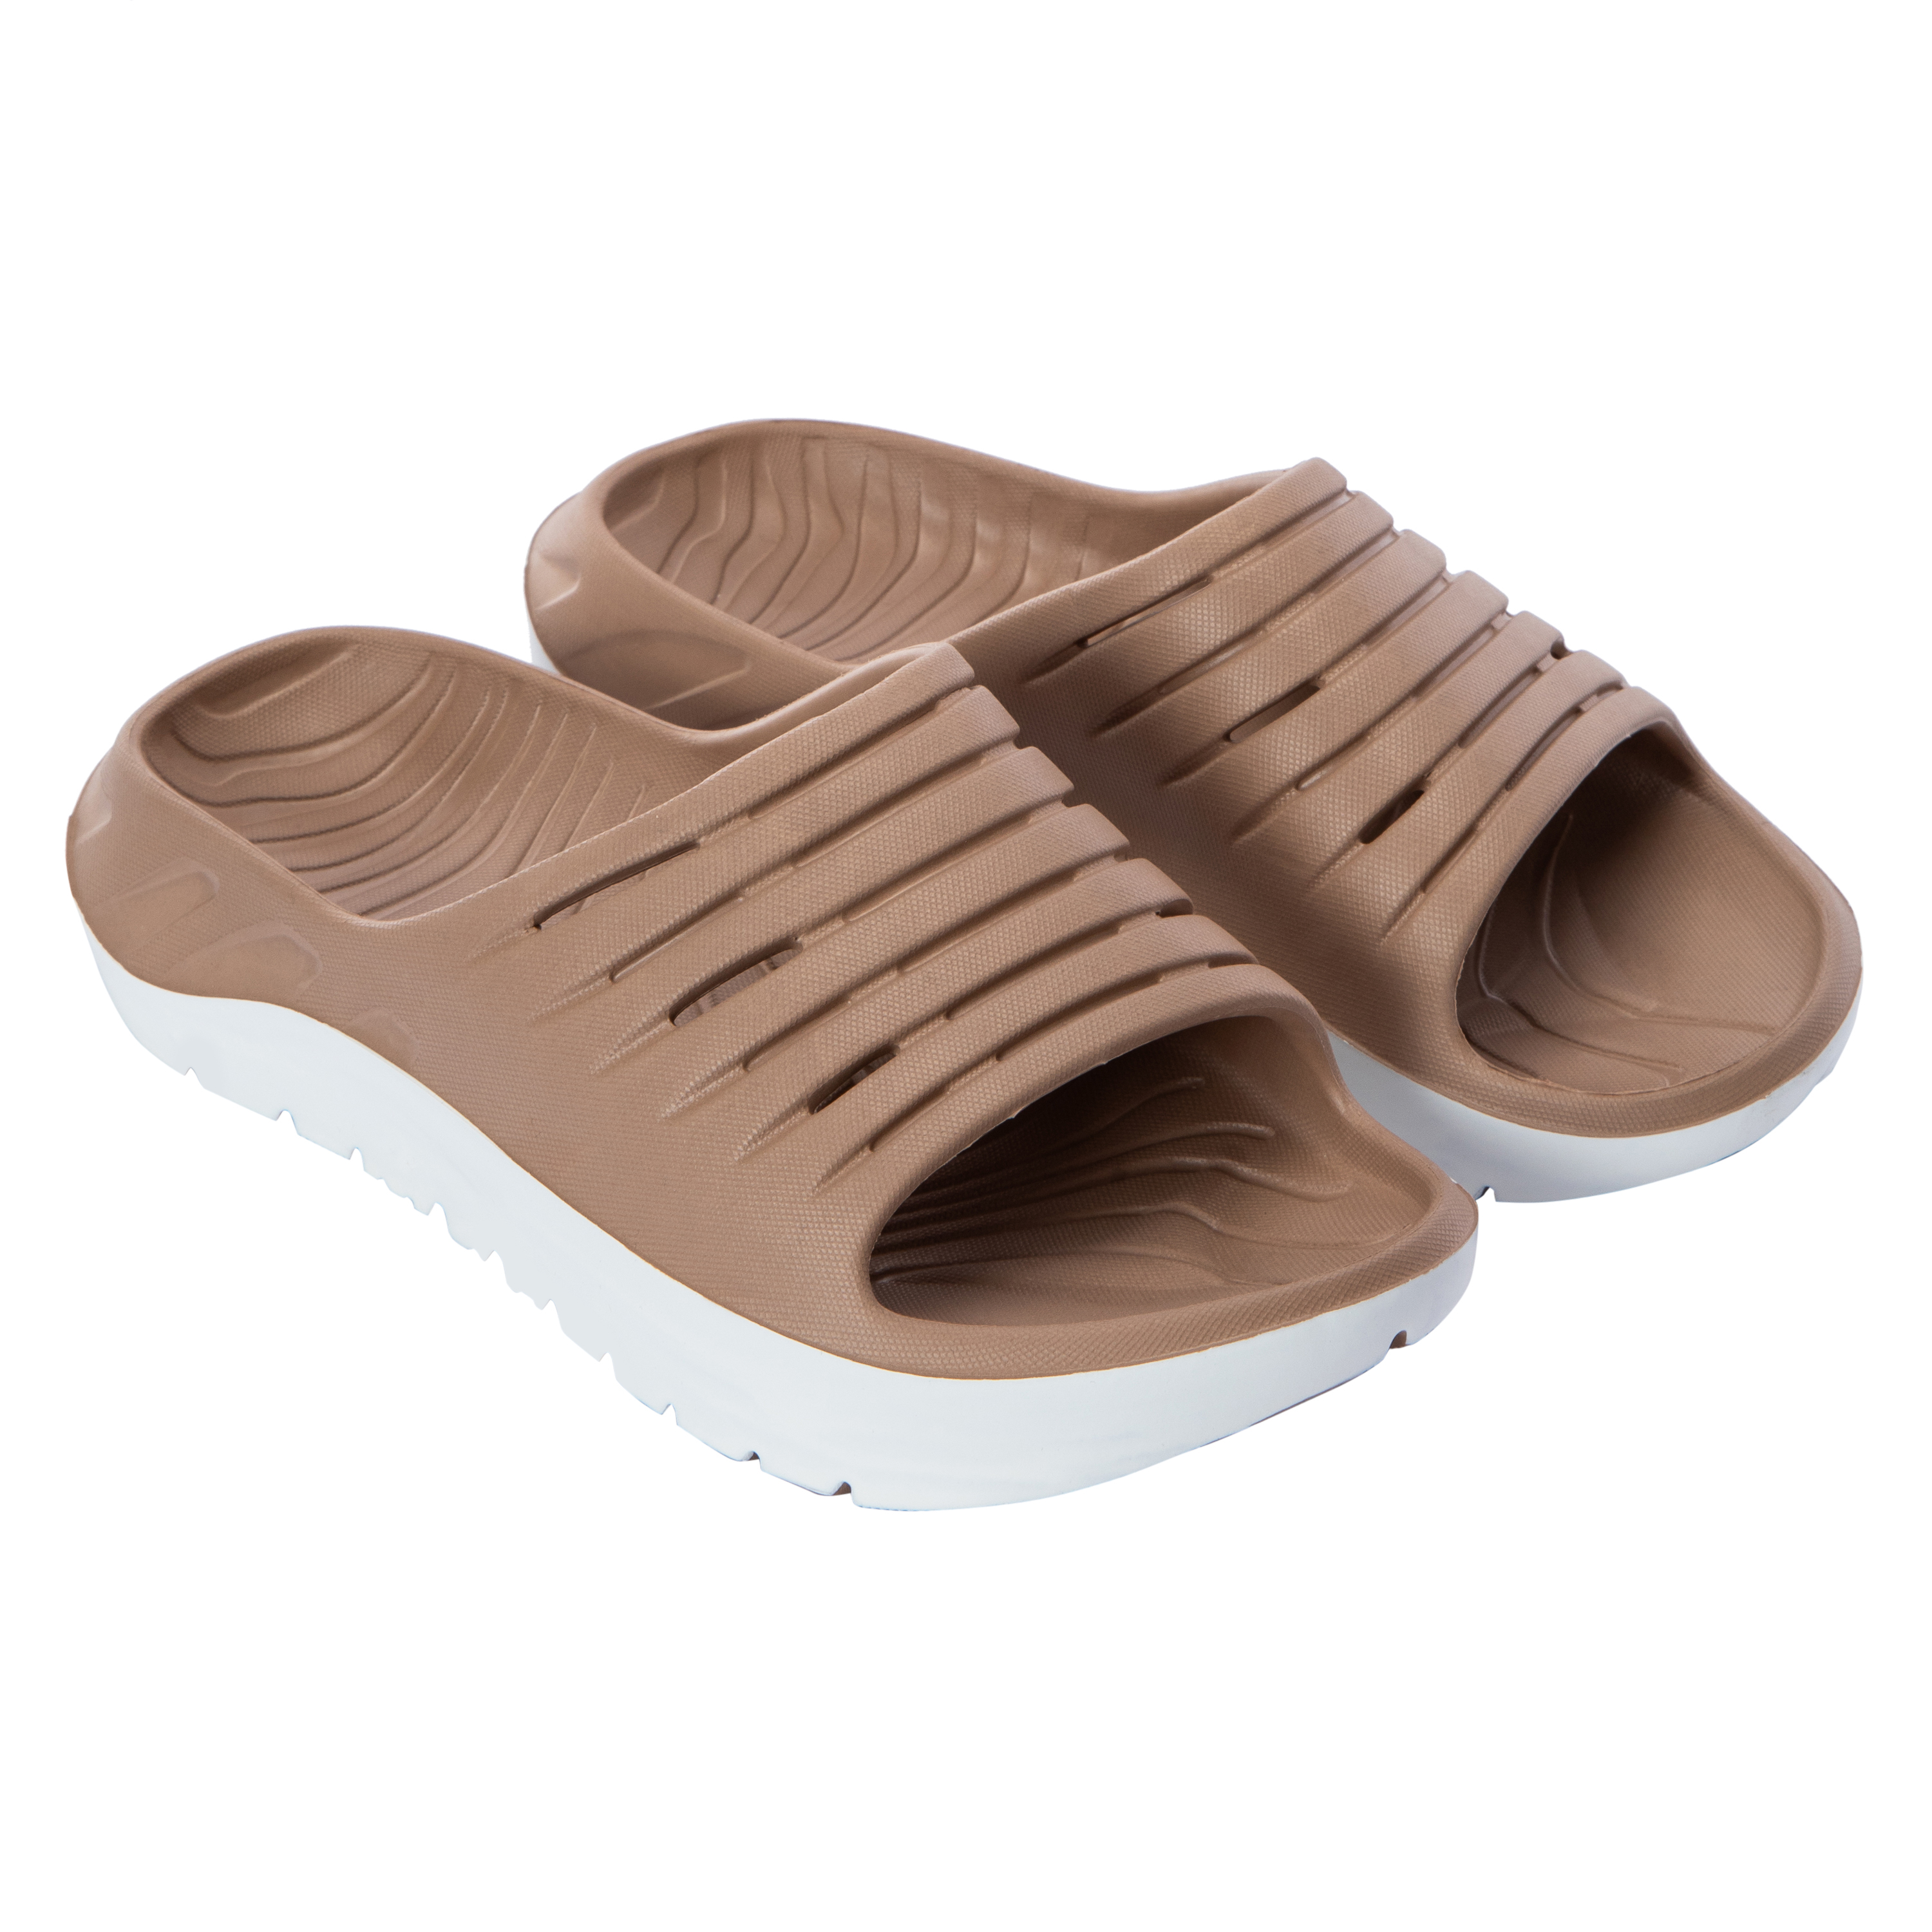 Unisex Recovery Slide Sandals